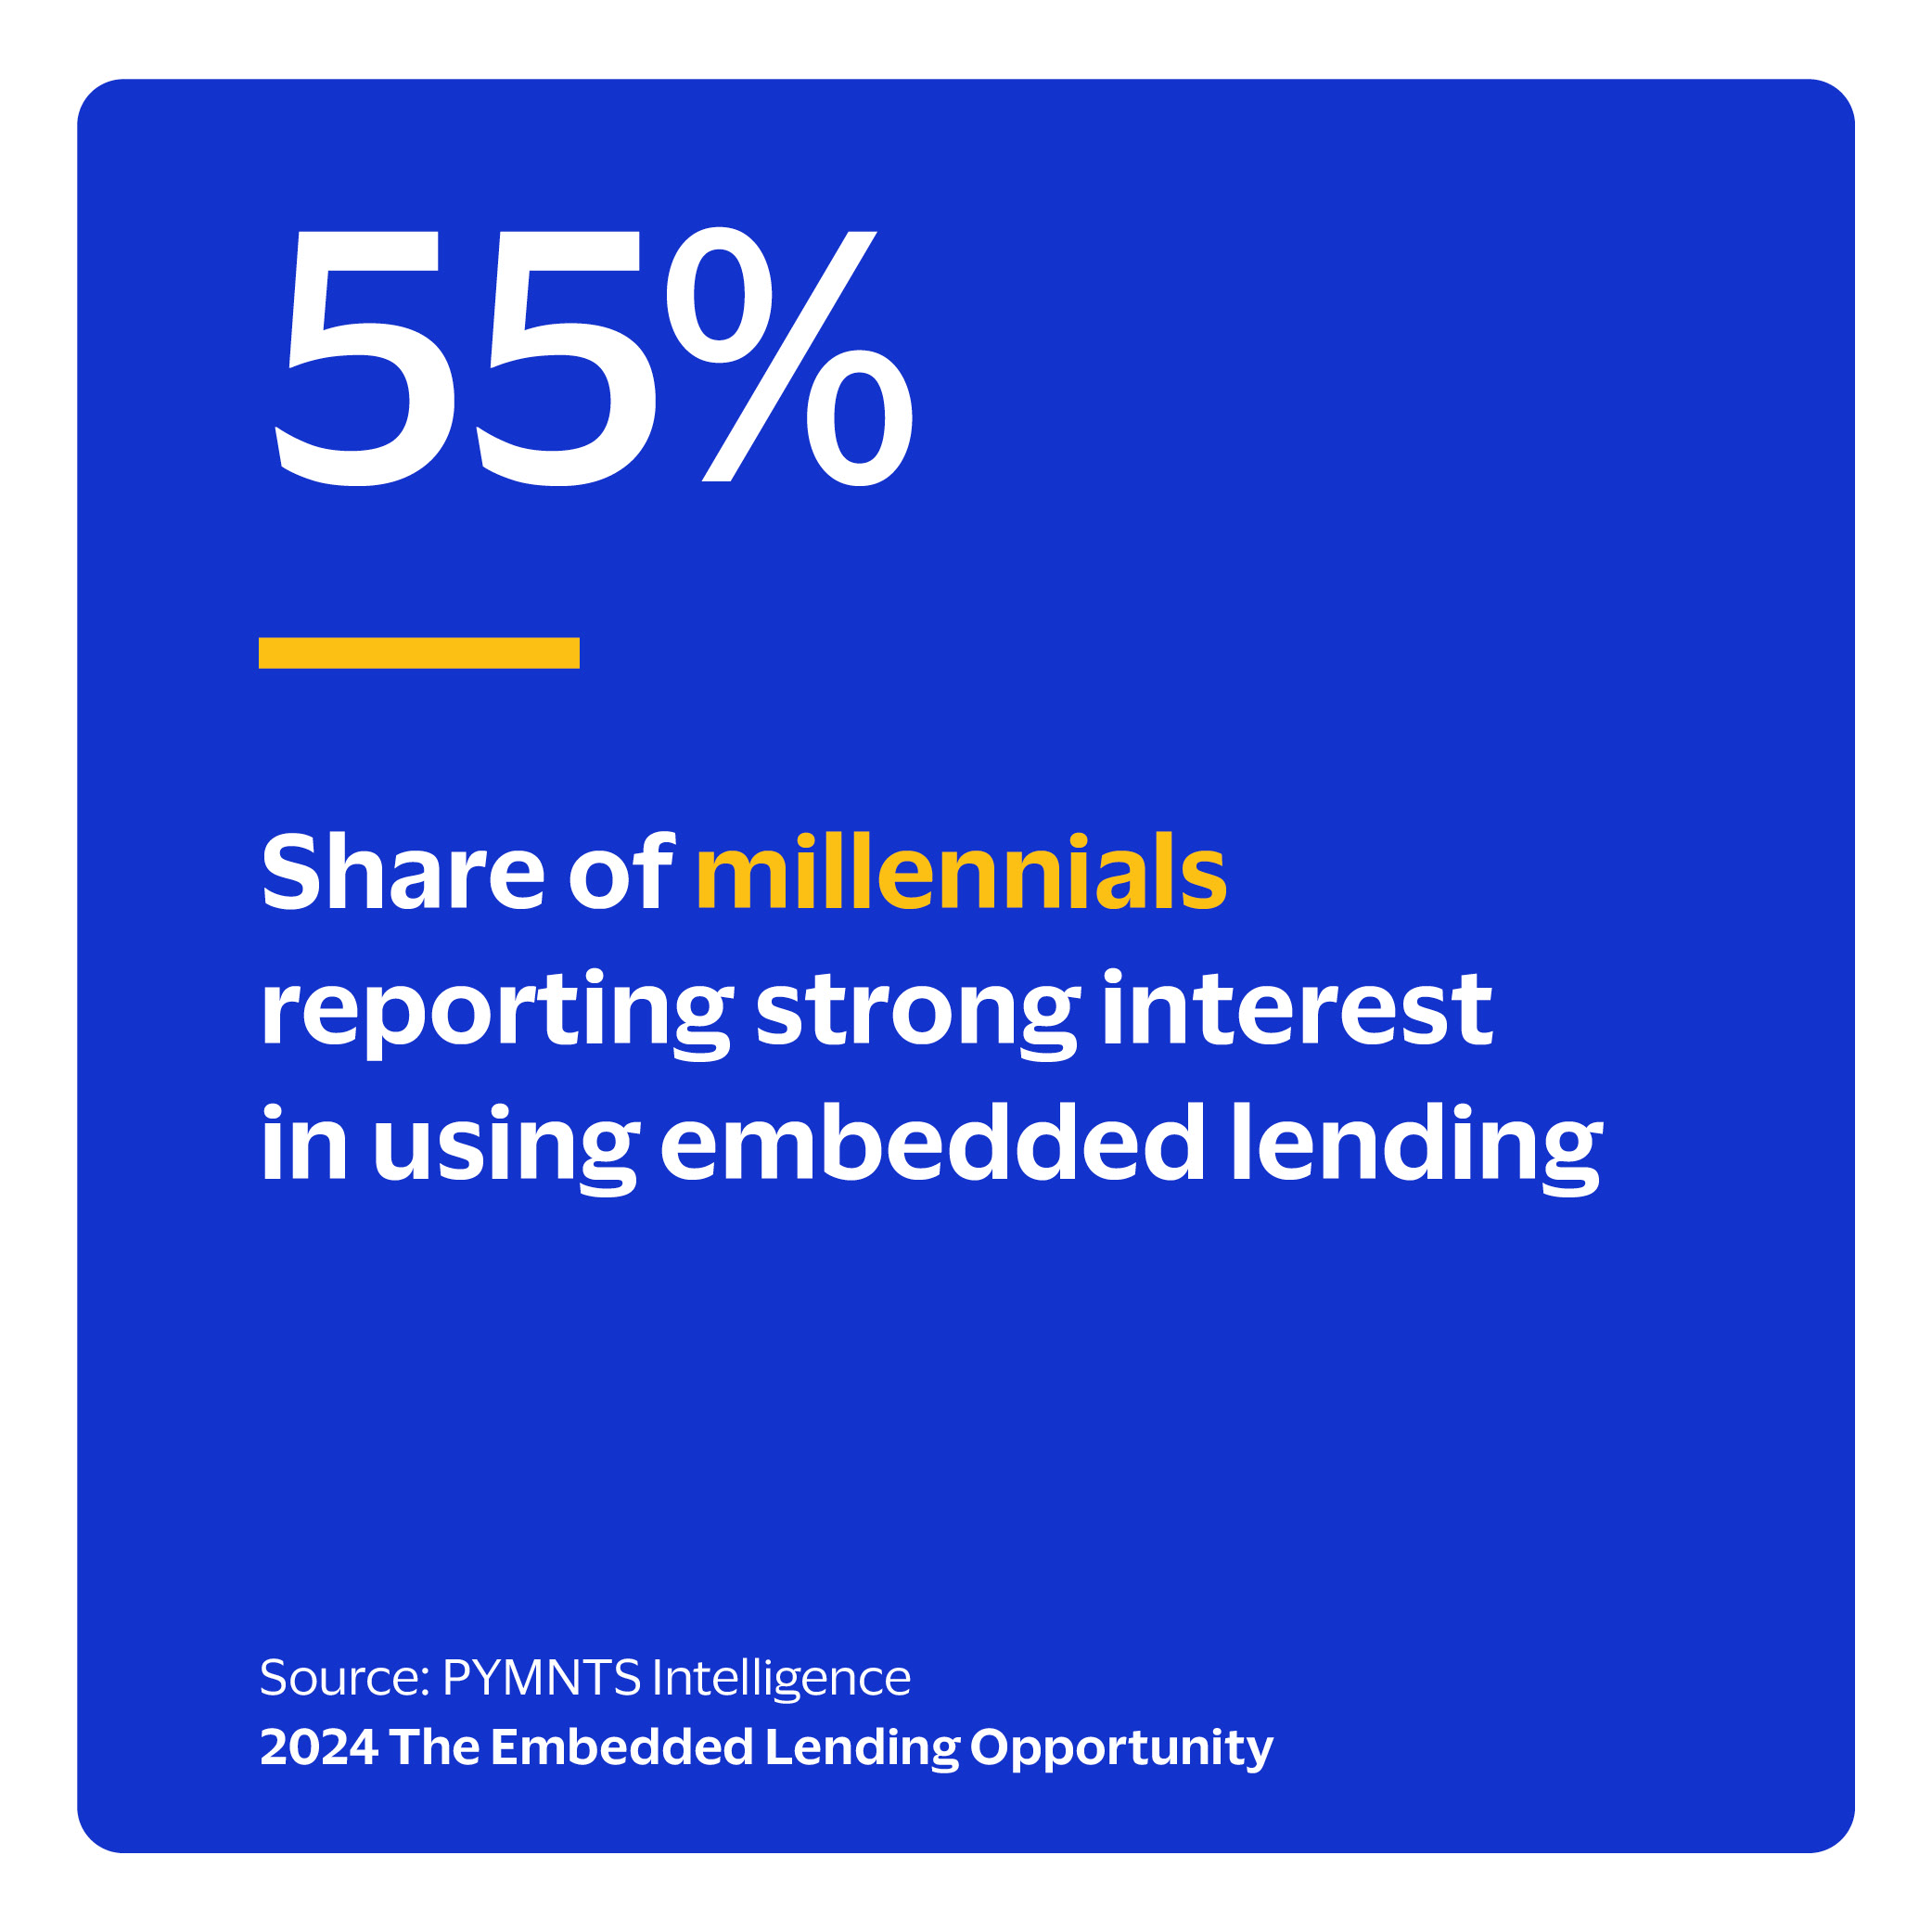  Share of millennials reporting strong interest in using embedded lending